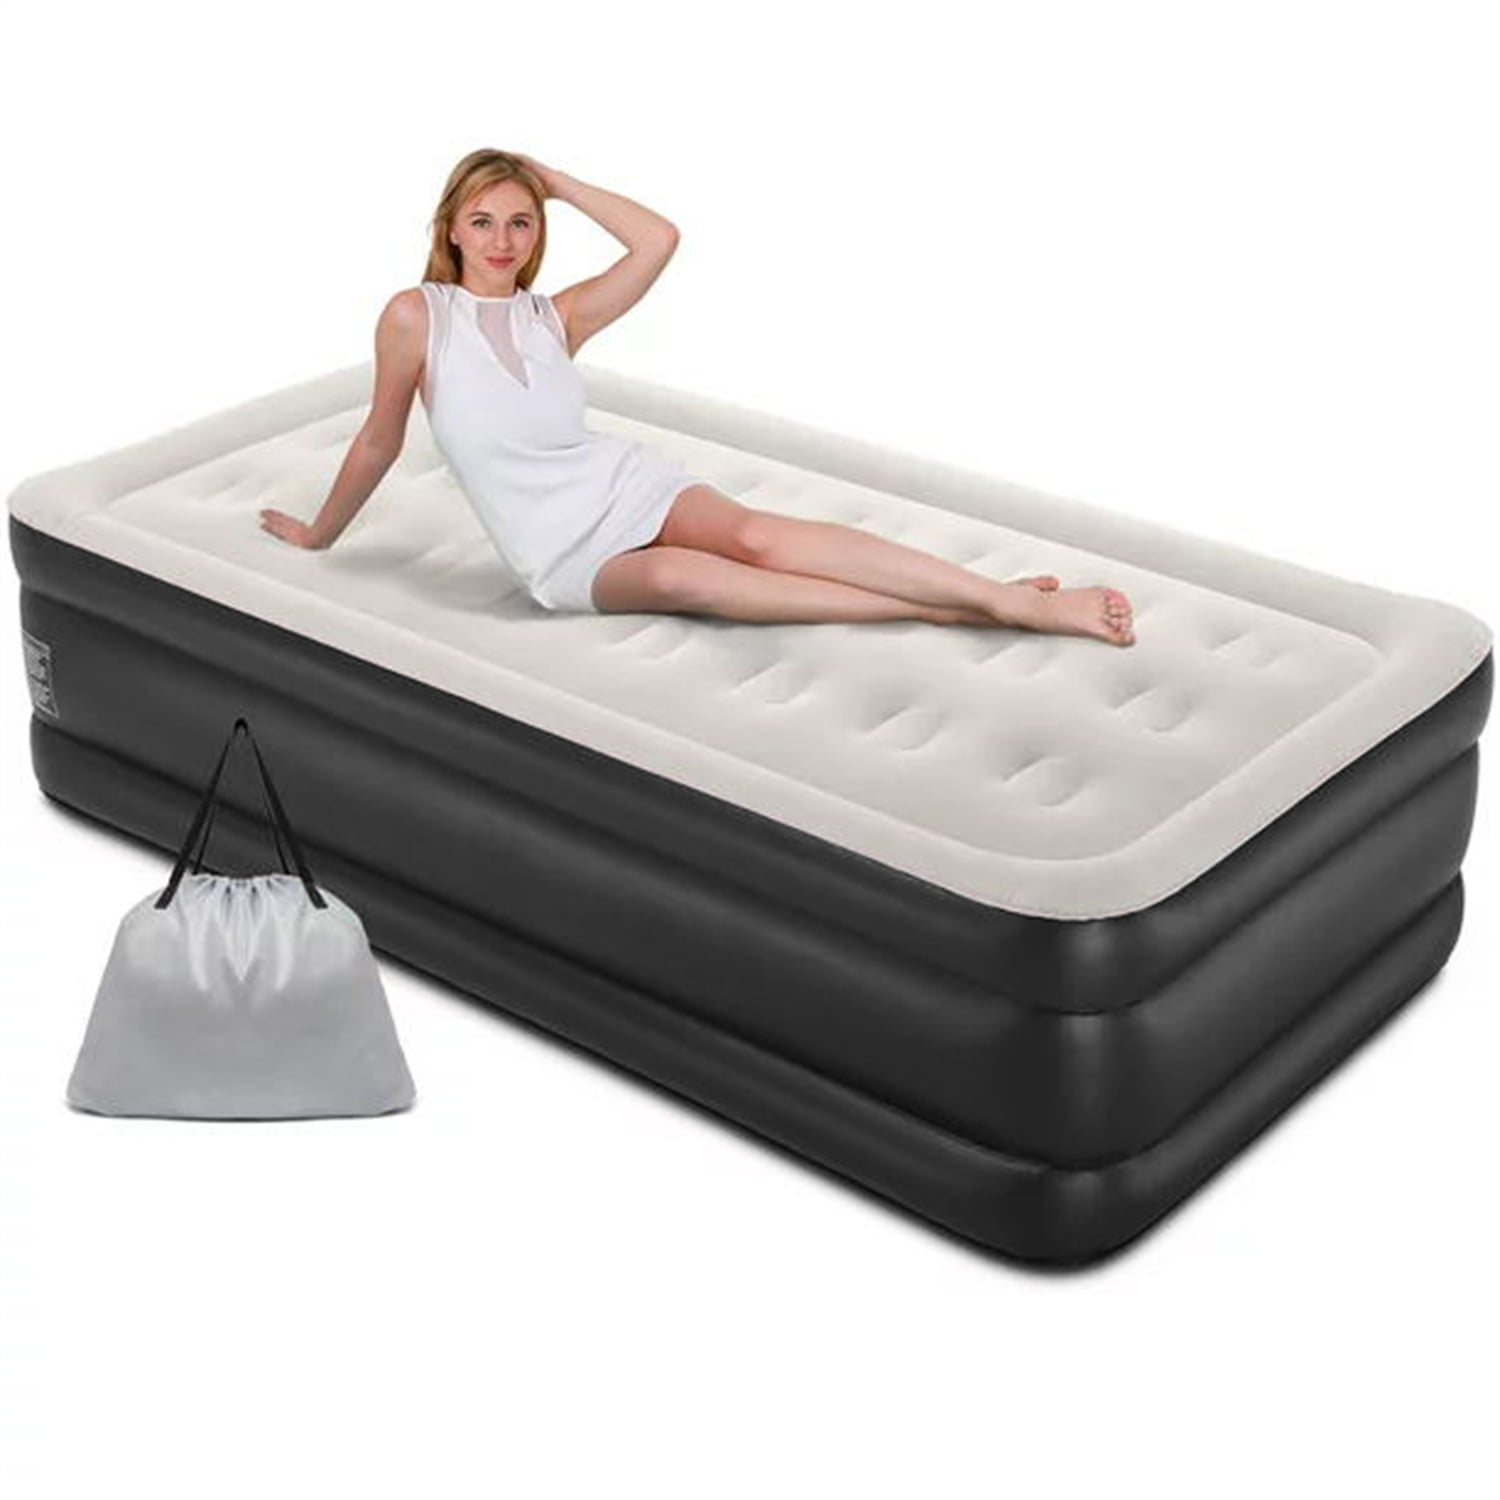 Double Airbed Quick Inflation  Camping Air Mattress with Built-In Pillow 